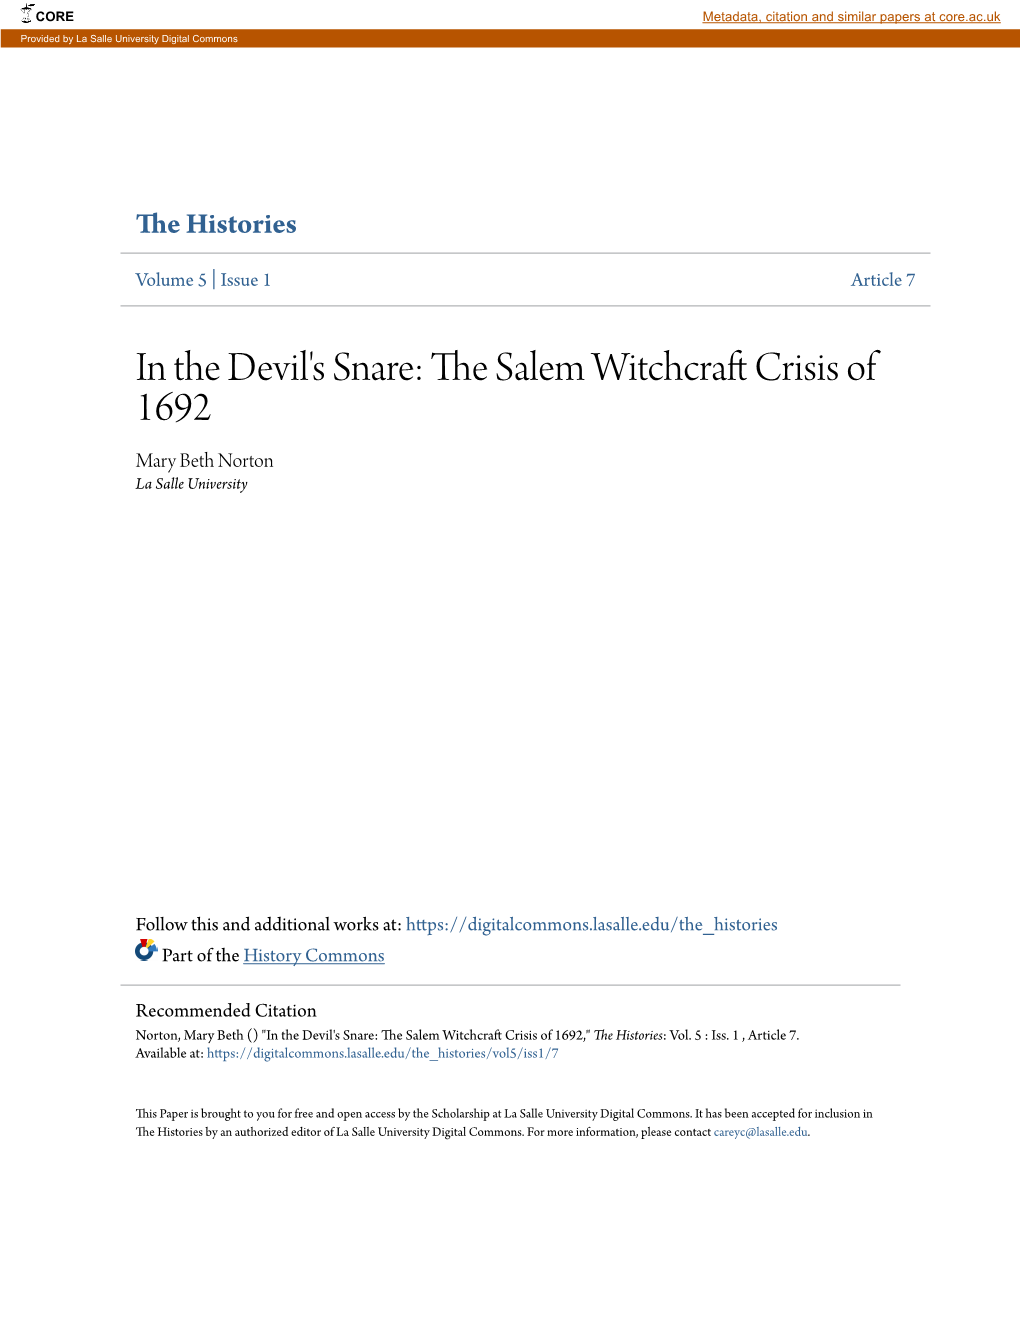 In the Devil's Snare: the Ales M Witchcraft Rc Isis of 1692 Mary Beth Norton La Salle University